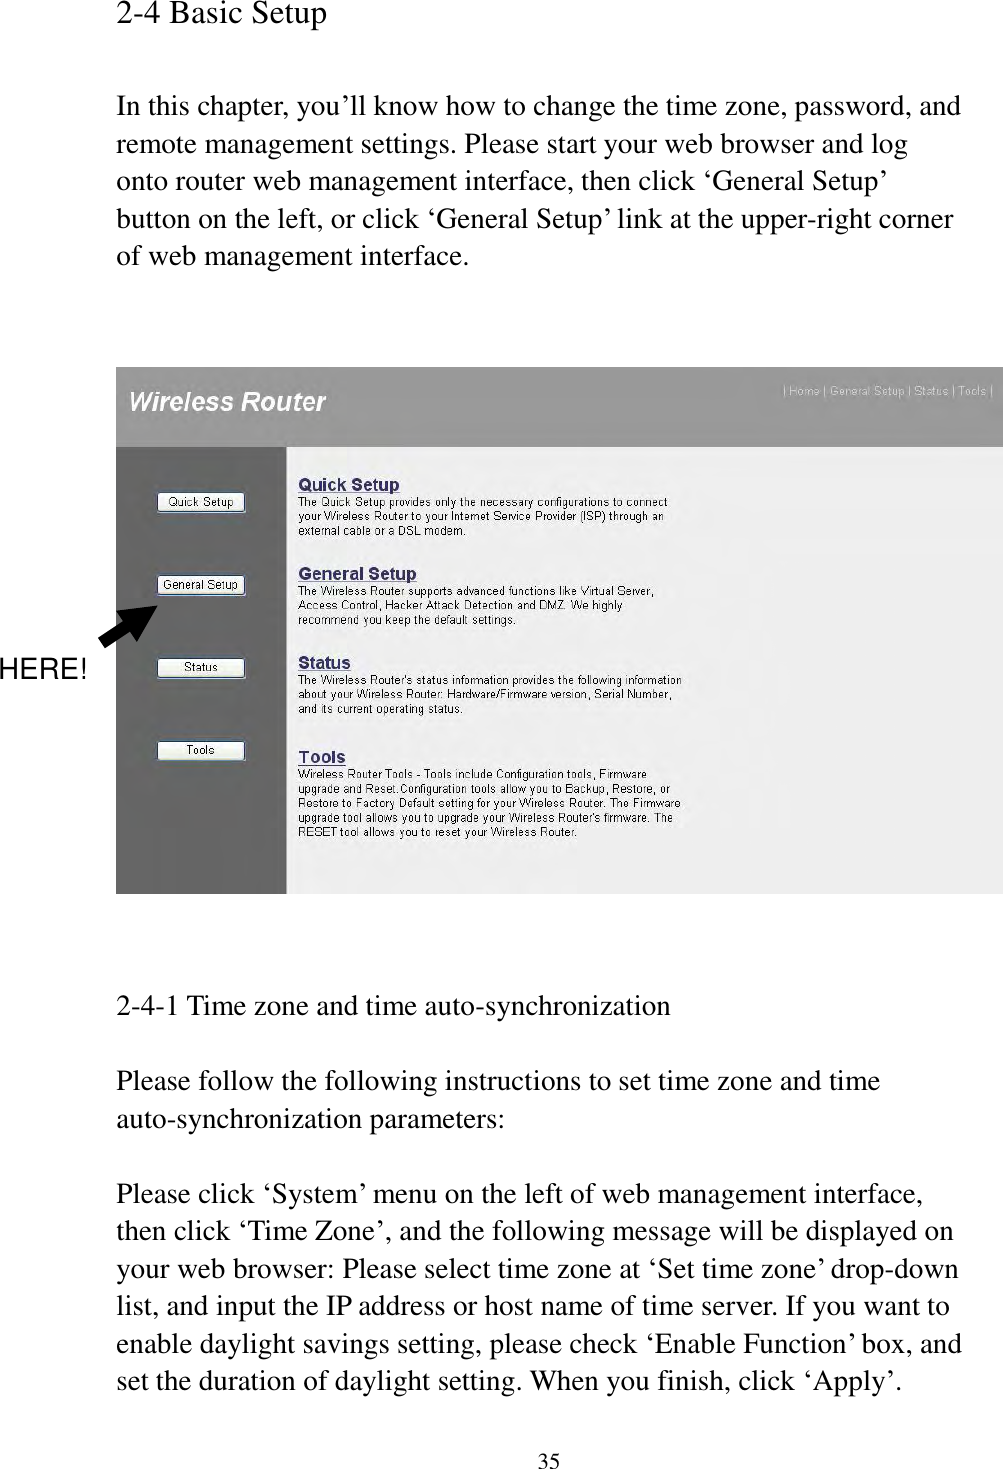 35 2-4 Basic Setup  In this chapter, you‟ll know how to change the time zone, password, and remote management settings. Please start your web browser and log onto router web management interface, then click „General Setup‟ button on the left, or click „General Setup‟ link at the upper-right corner of web management interface.      2-4-1 Time zone and time auto-synchronization  Please follow the following instructions to set time zone and time auto-synchronization parameters:  Please click „System‟ menu on the left of web management interface, then click „Time Zone‟, and the following message will be displayed on your web browser: Please select time zone at „Set time zone‟ drop-down list, and input the IP address or host name of time server. If you want to enable daylight savings setting, please check „Enable Function‟ box, and set the duration of daylight setting. When you finish, click „Apply‟. HERE! 